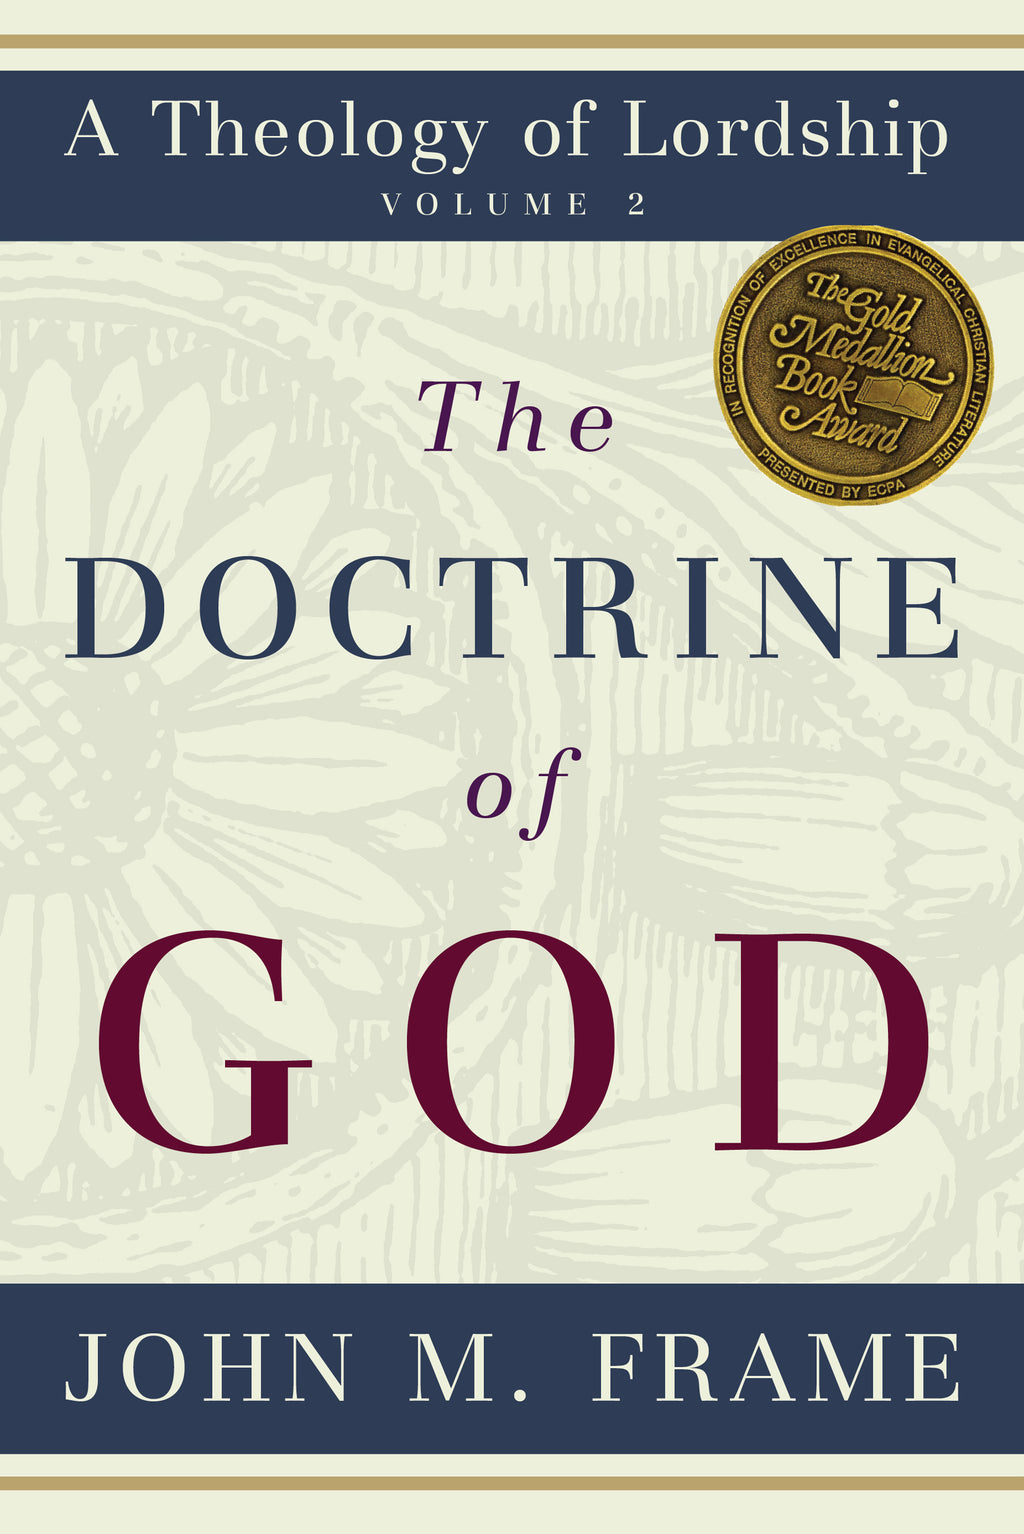 Experimental Theology: The Gospel According to The Lord of the